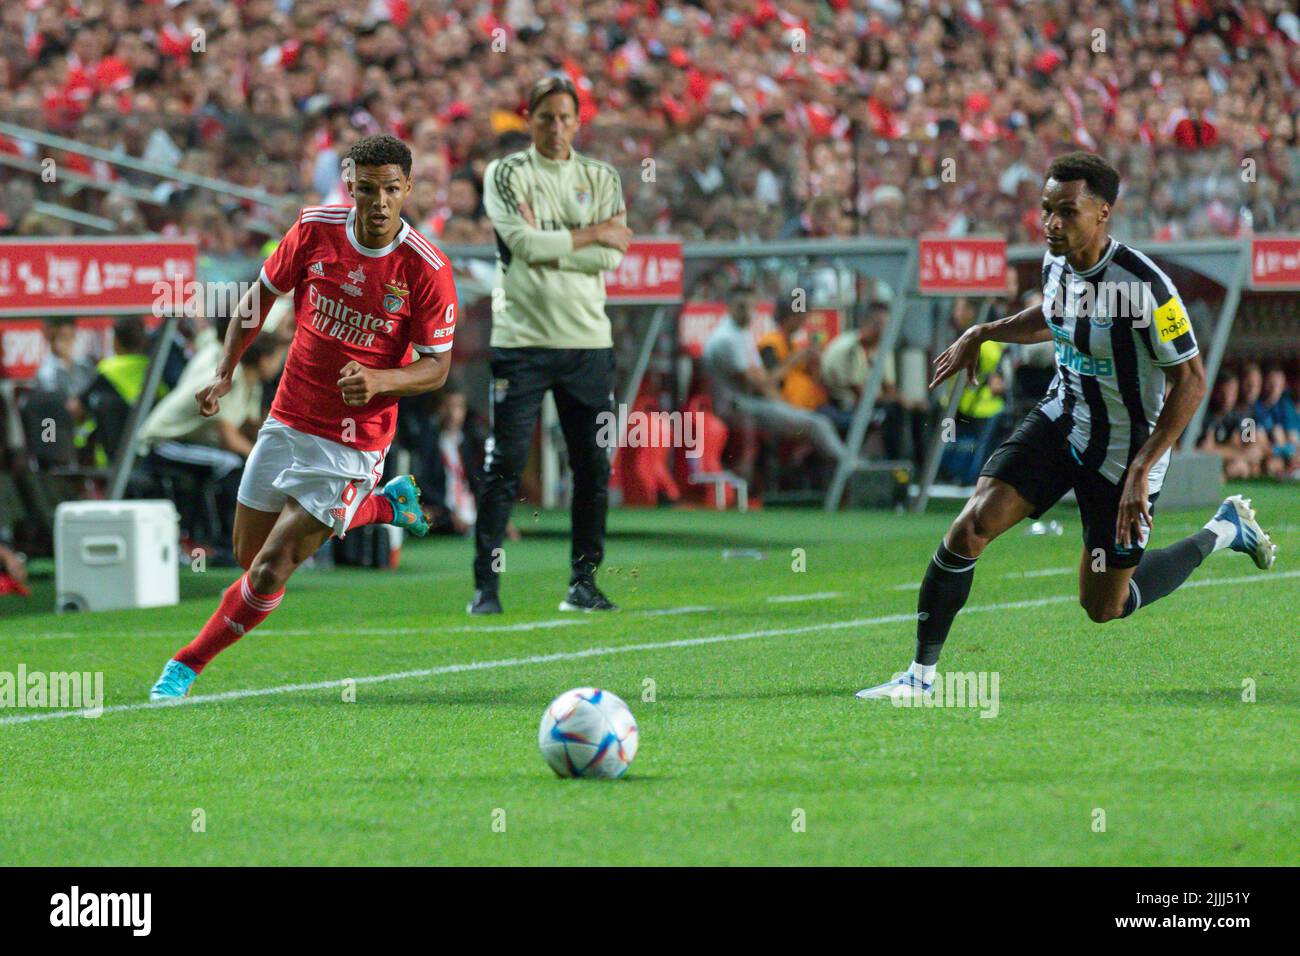 Lisbon, Portugal. July 26, 2022.  Benfica's defender from Denmark Alexander Bah (6) in action during the friendly game between SL Benfica vs Newcastle United FC Credit: Alexandre de Sousa/Alamy Live News Stock Photo